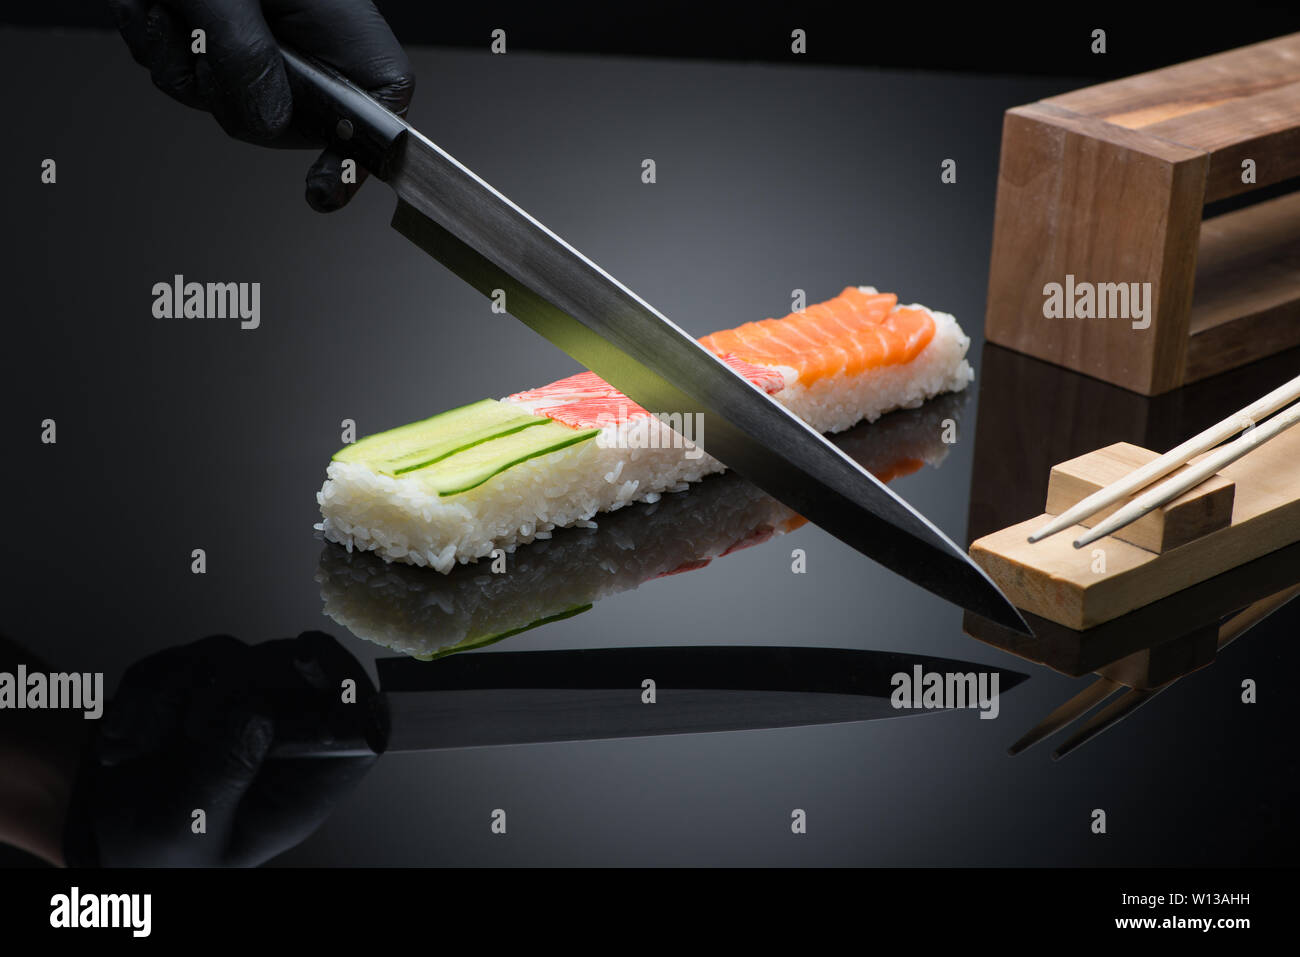 chef prepares sushi, cuts with a knife. sushi on black background with reflection Stock Photo